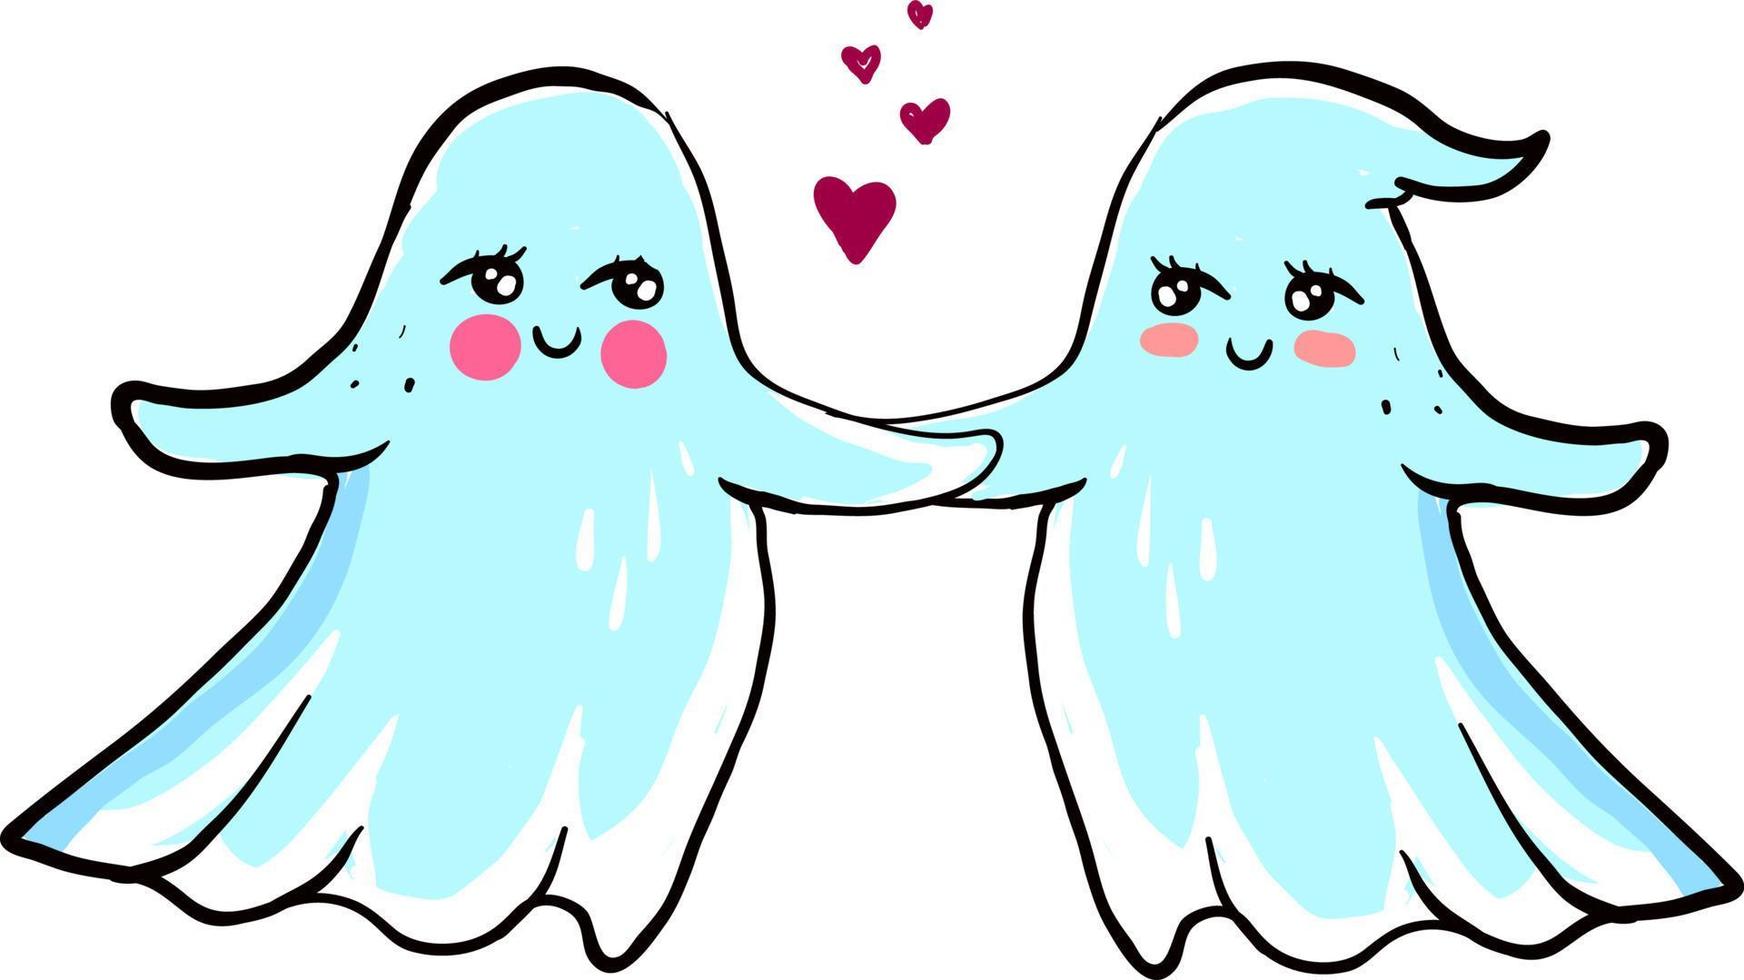 Ghosts in love, illustration, vector on white background.